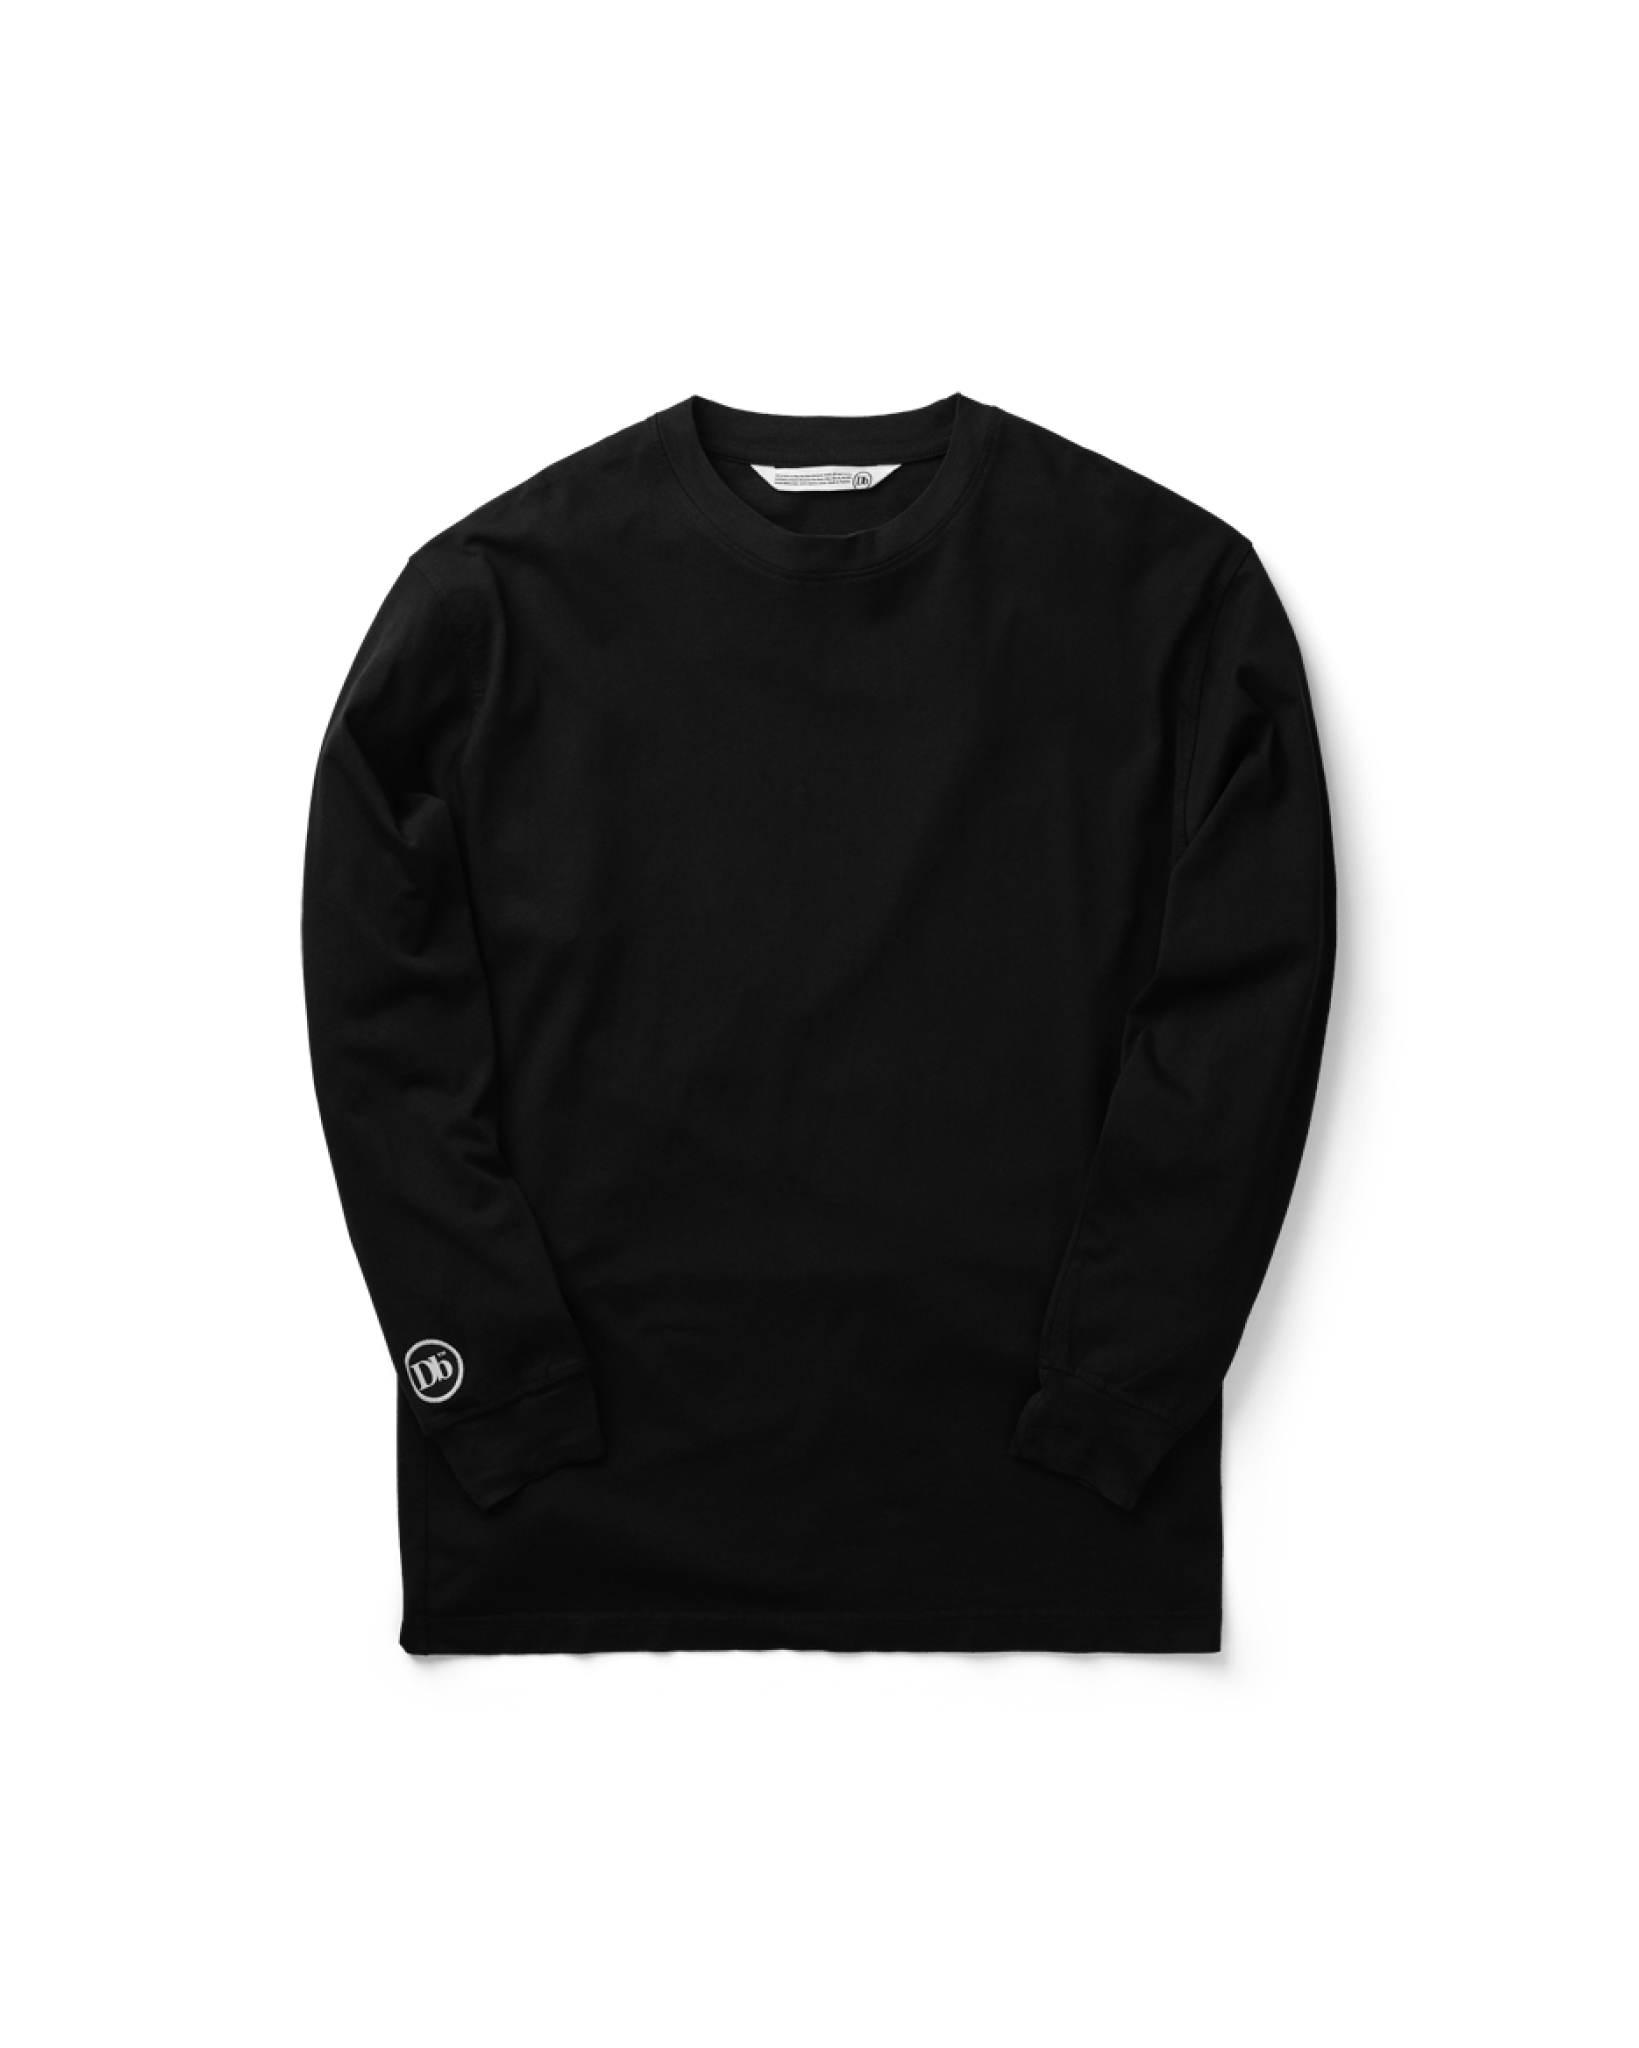 Anywear Long Sleeve Black Out - L